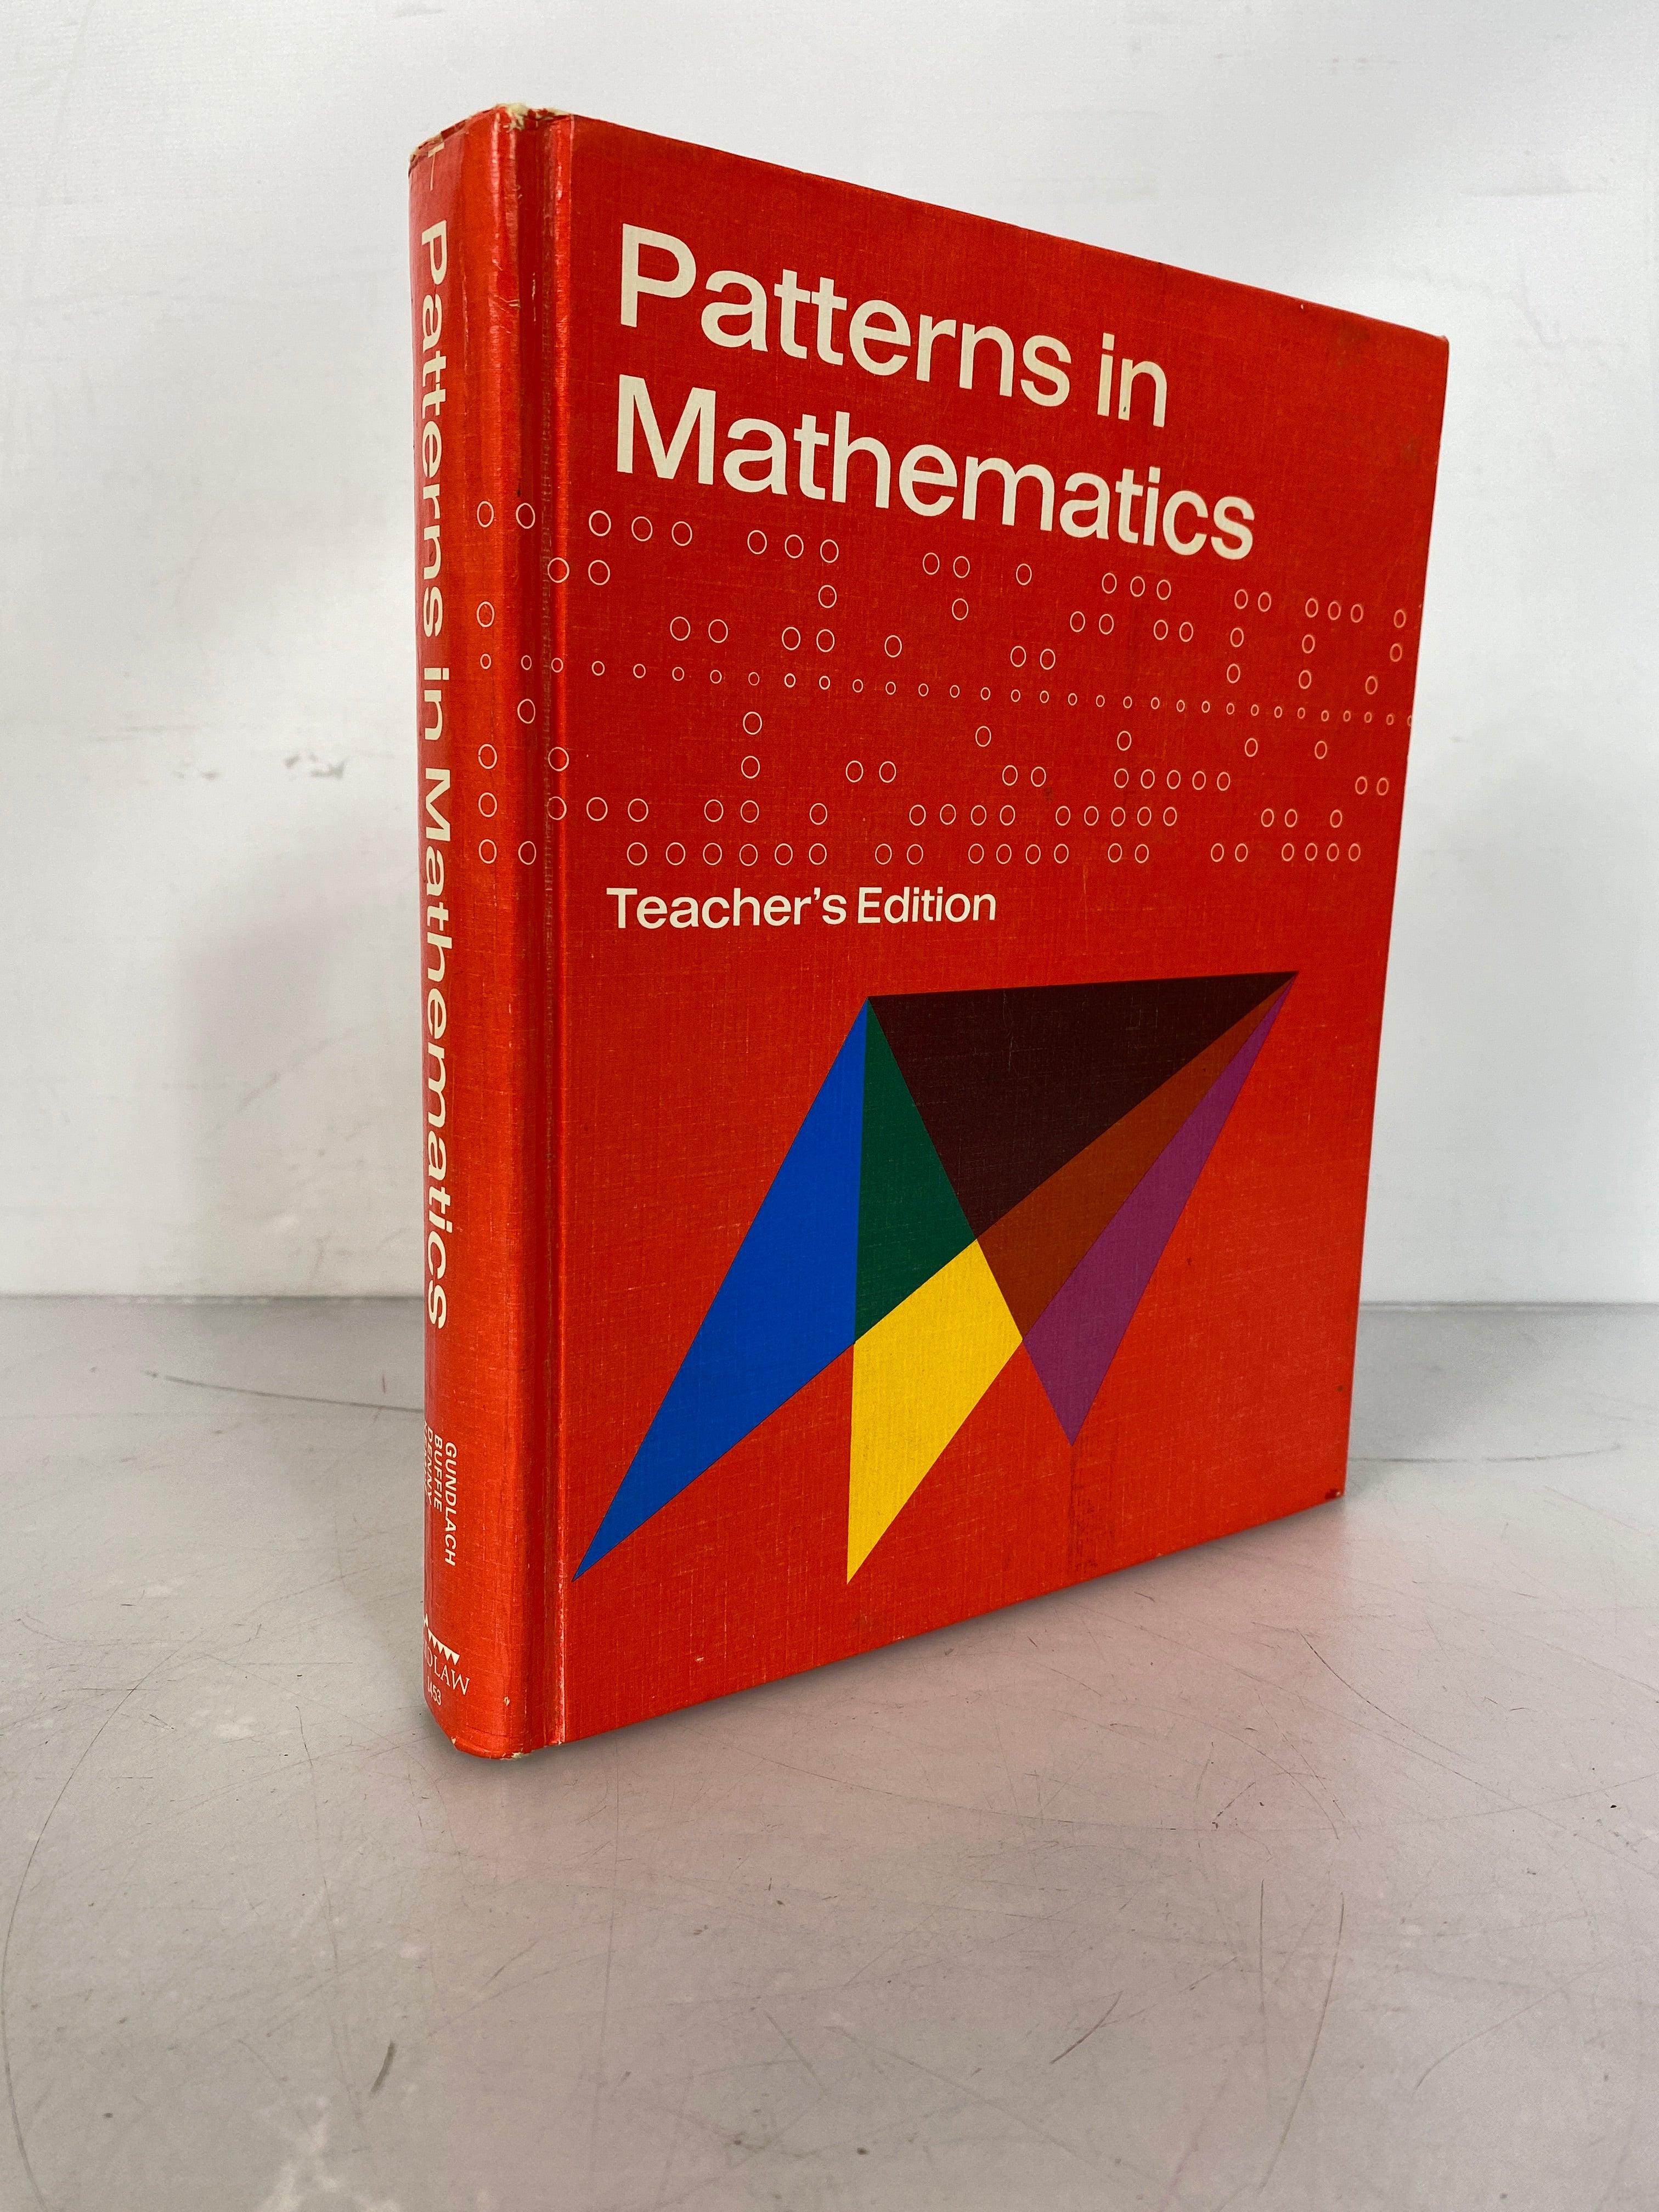 Lot of 2 Early Mathematics Instruction Textbooks- Patterns in Mathematics and First Course 1960, 1972 HC